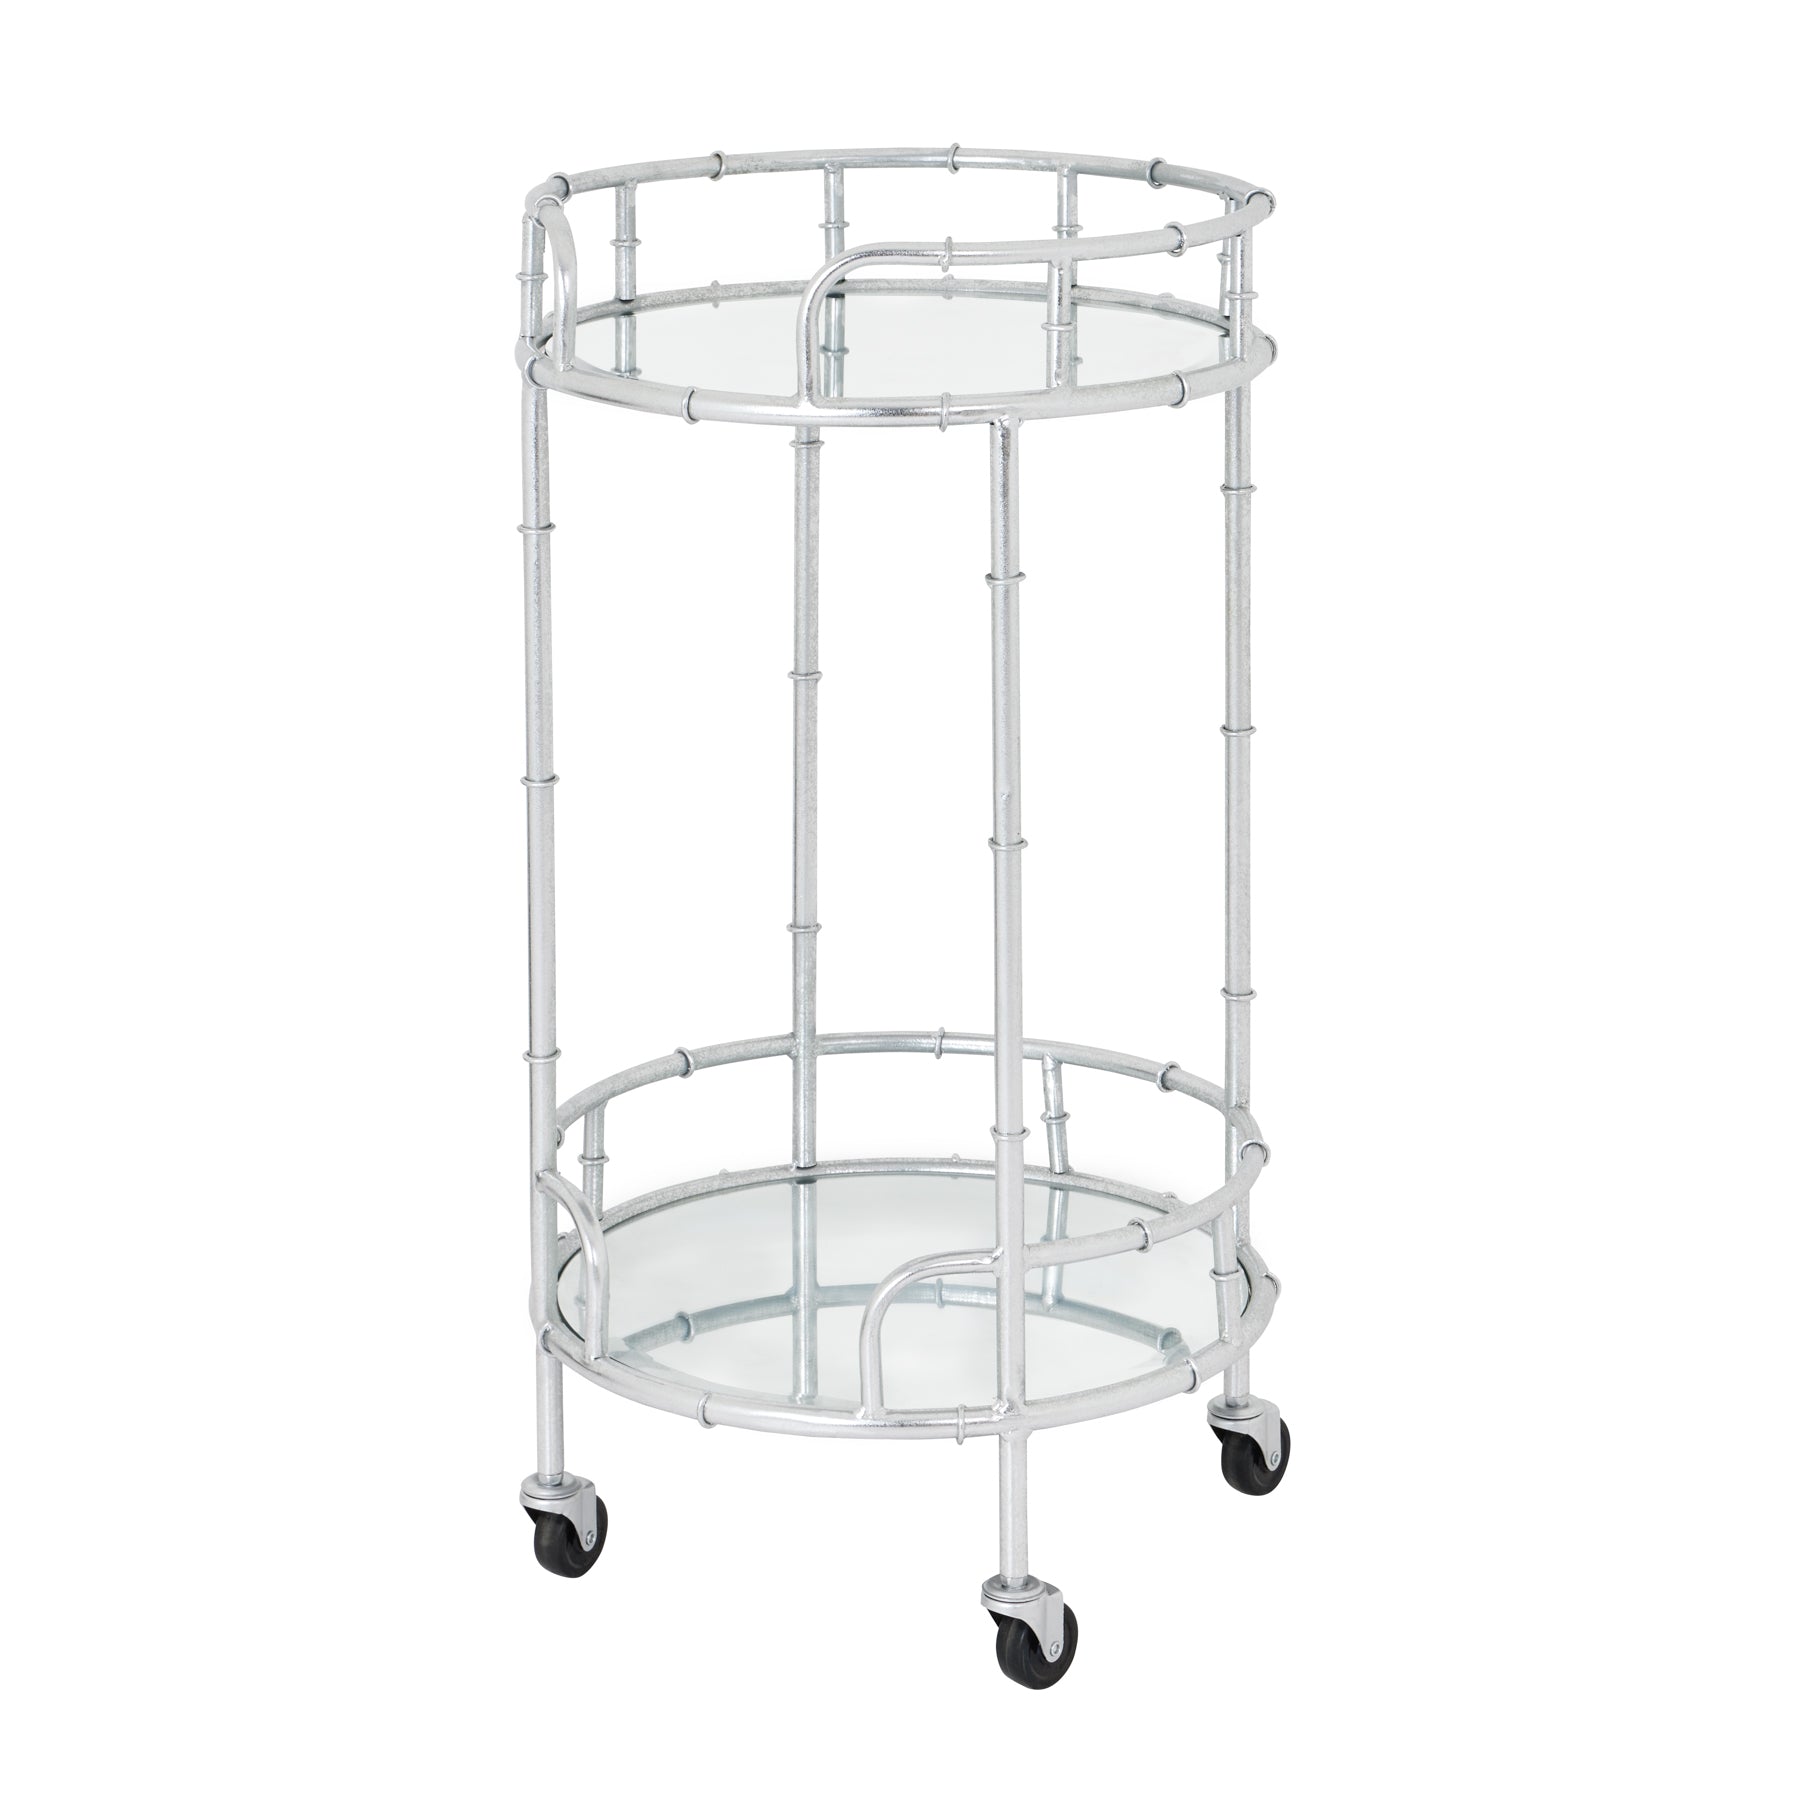 View Silver Round Drinks Trolley information